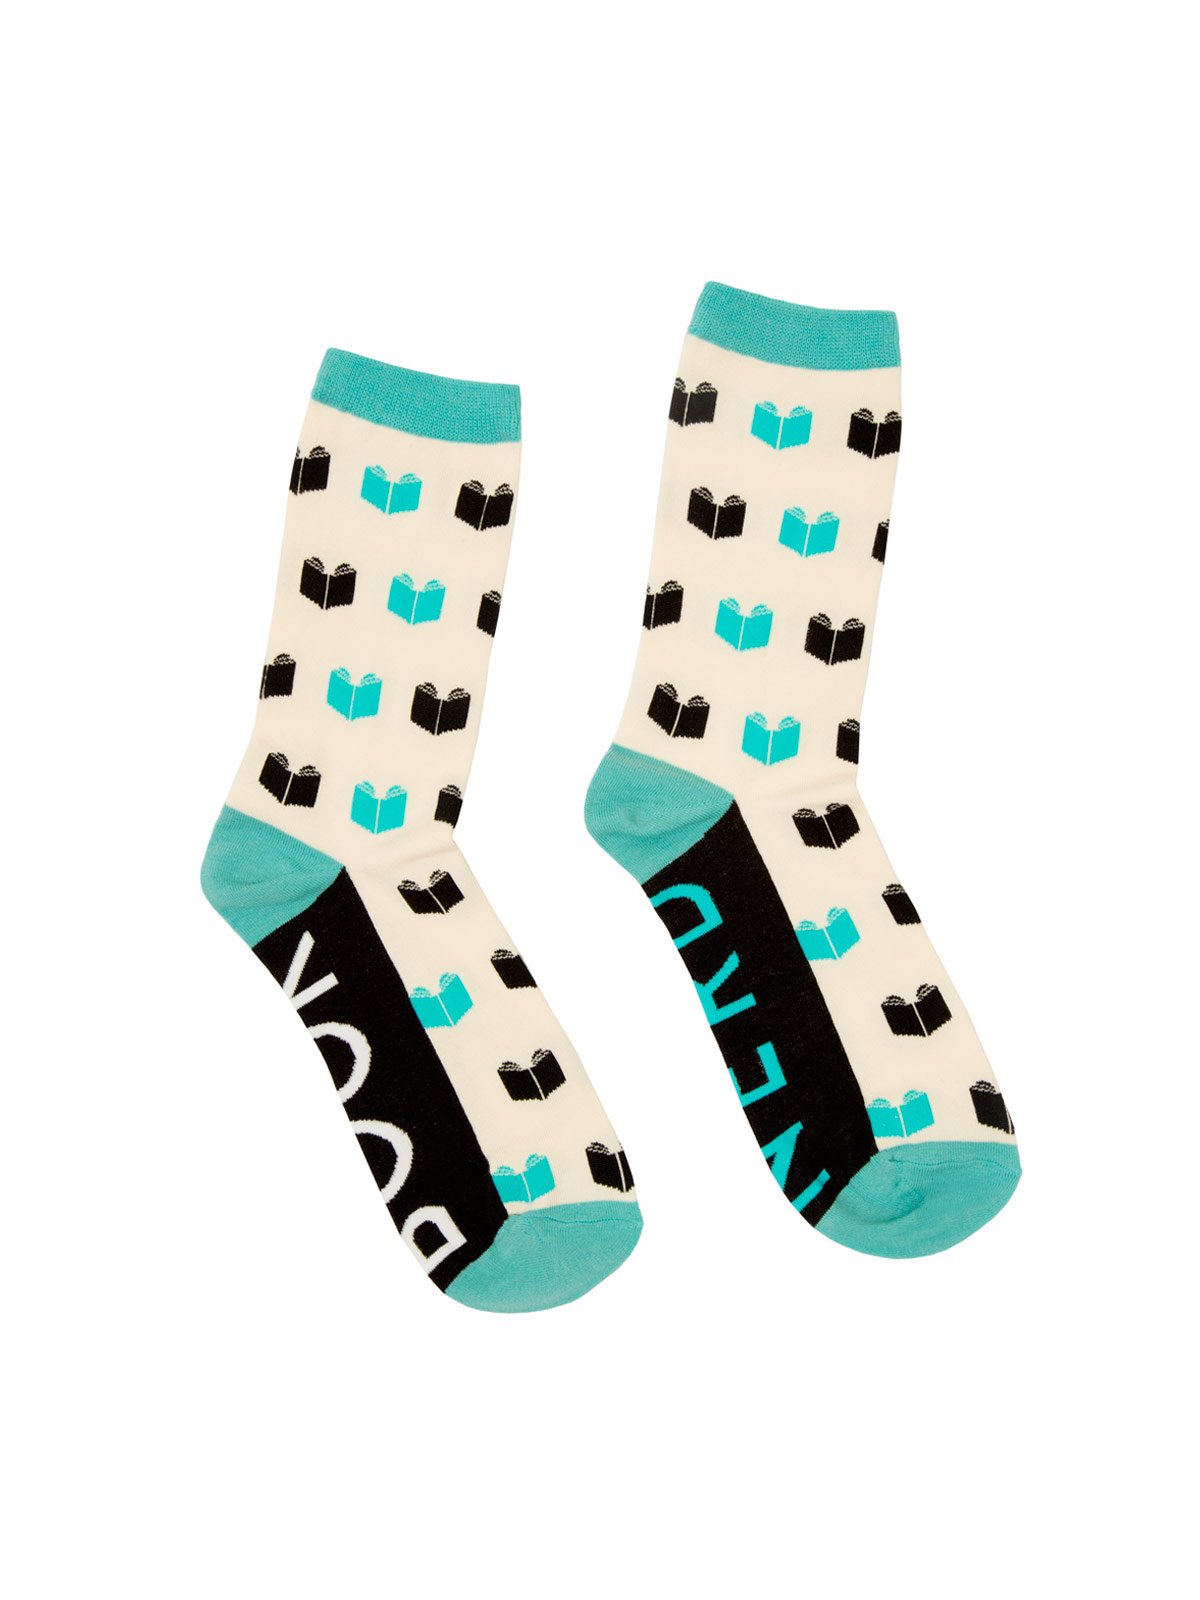 black and teal socks that say book nerd on the sole and have a book pattern design.